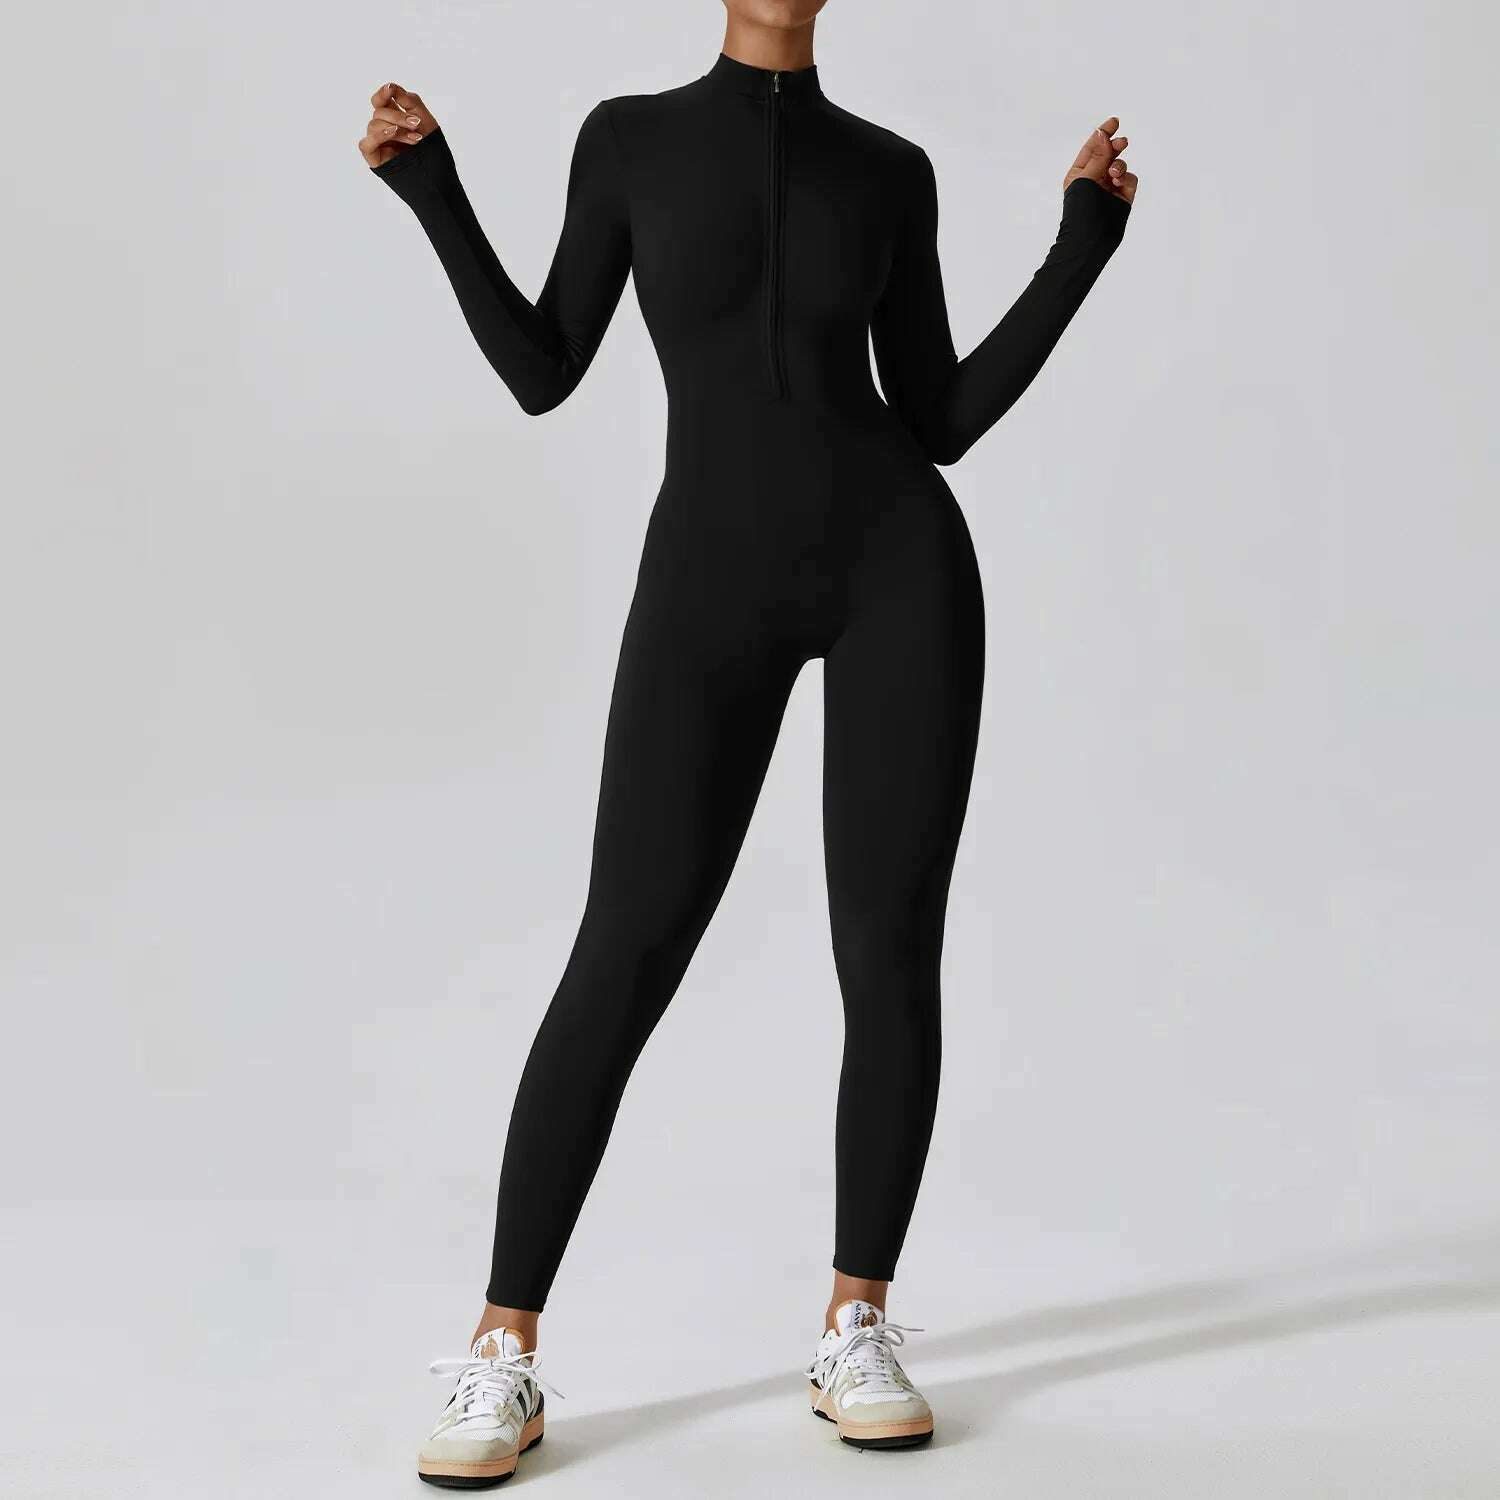 KIMLUD, Yoga Boilersuit Long Sleeved Women's Sportswear Gym Zipper Jumpsuits Workout High-intensity Fitness One-piece Skin-tight Garment, Advanced Black / S / CHINA, KIMLUD Womens Clothes